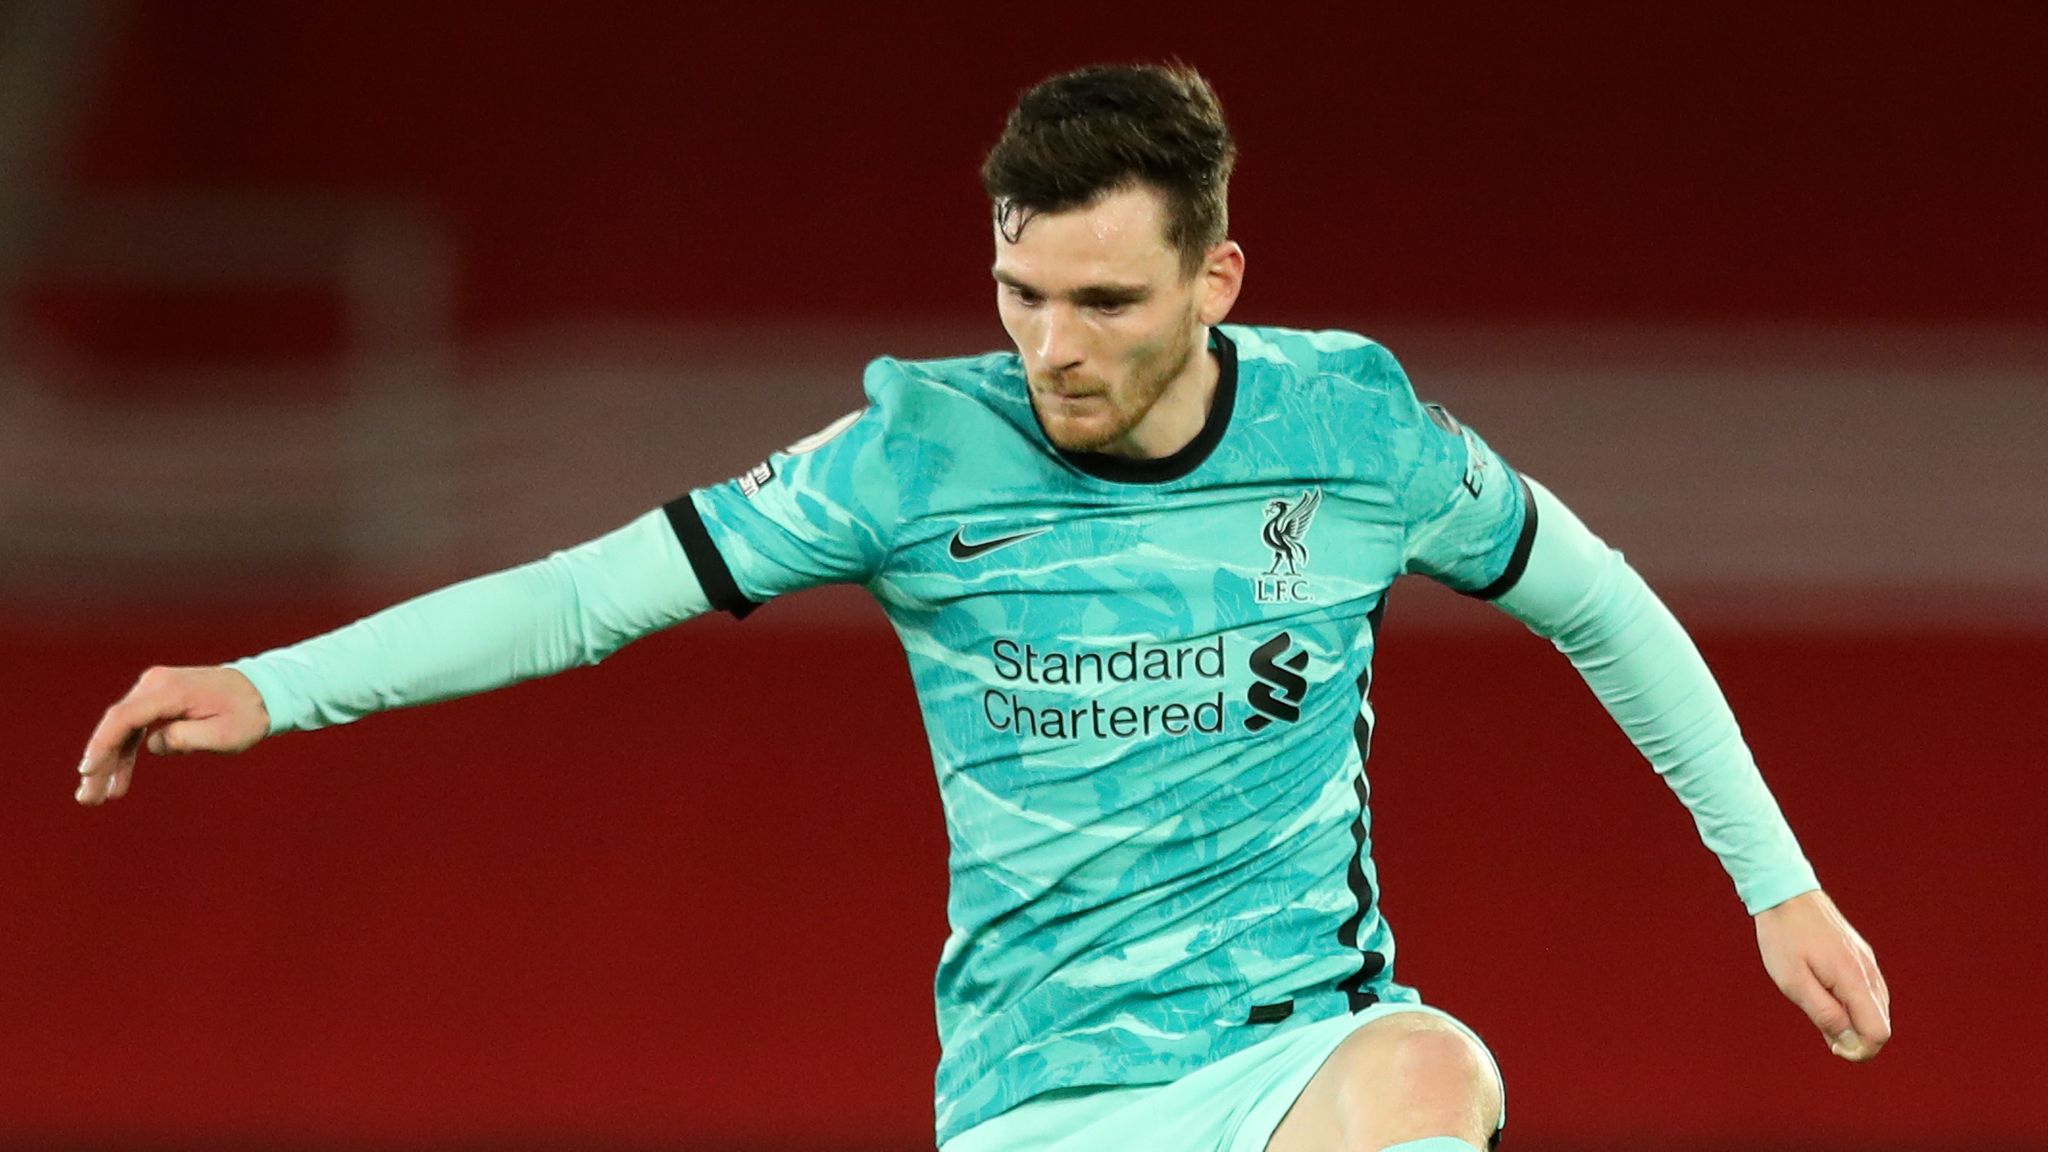 Liverpool's Andy Robertson Best Left Back In World, Says Jose Enrique